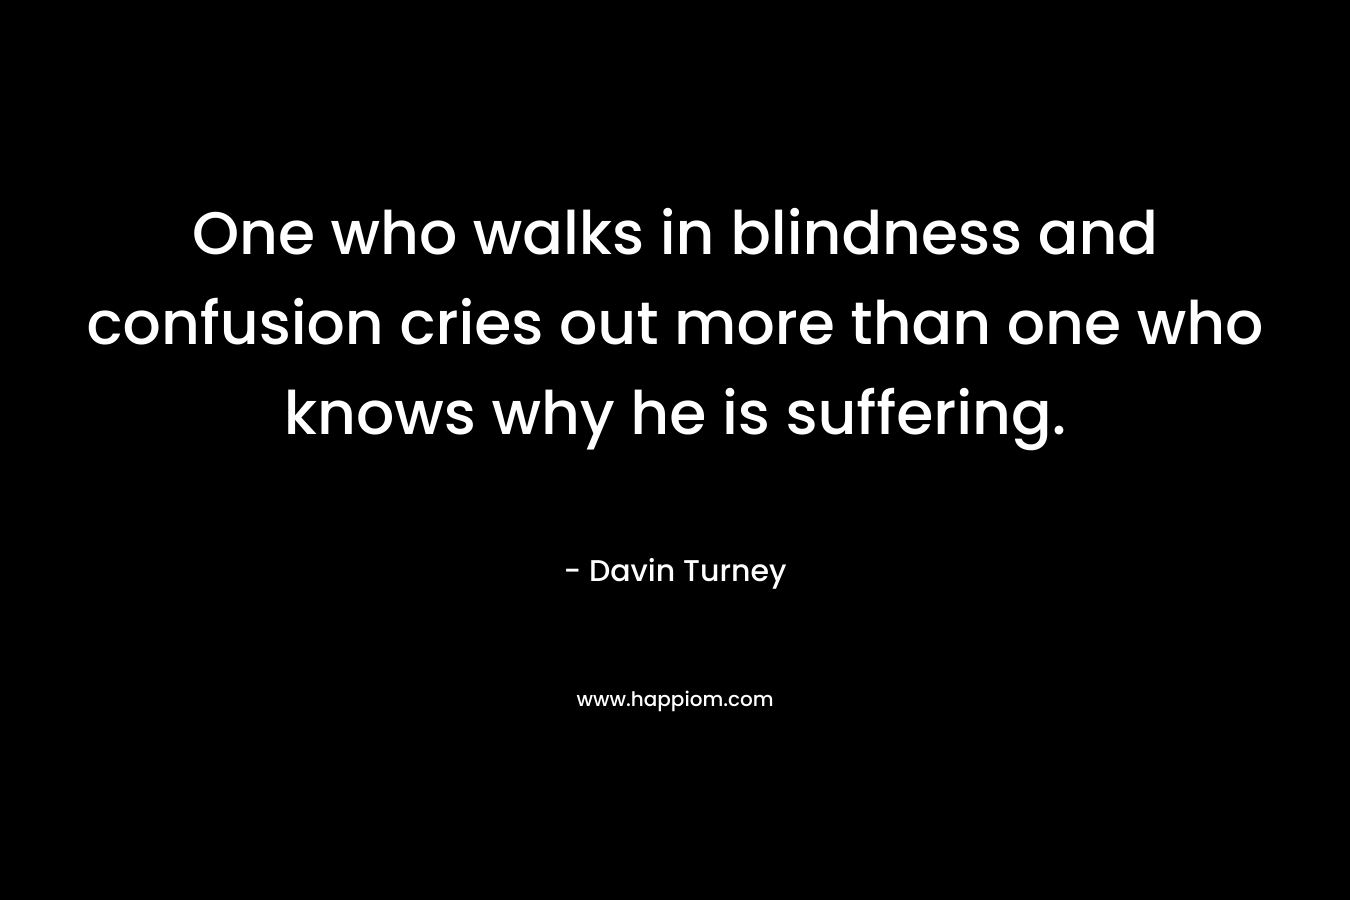 One who walks in blindness and confusion cries out more than one who knows why he is suffering.